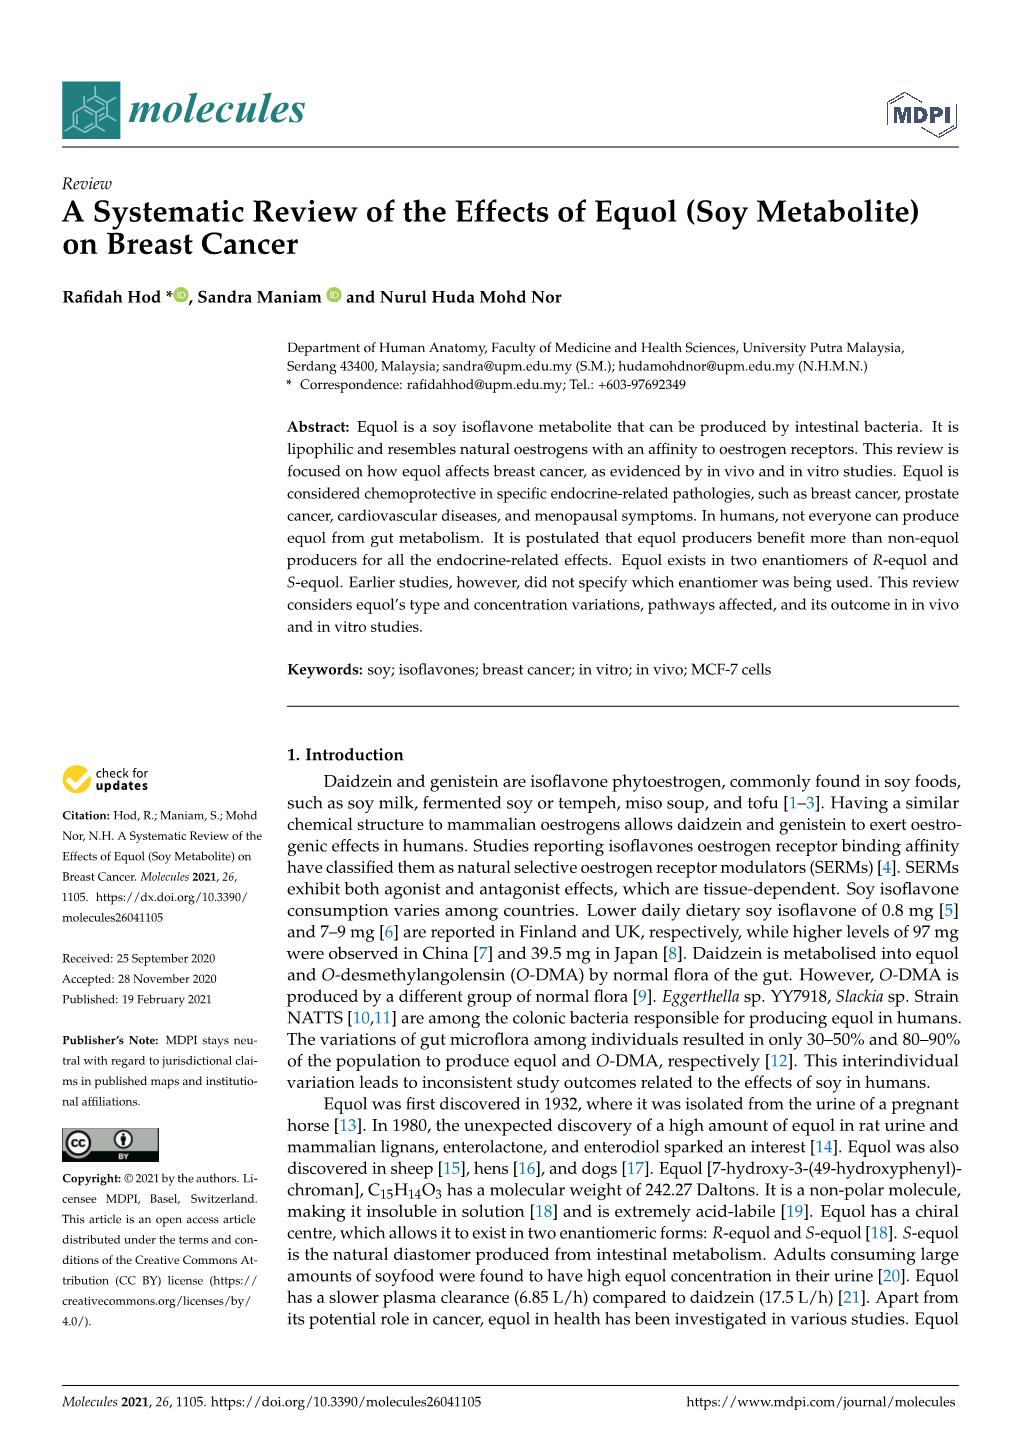 A Systematic Review of the Effects of Equol (Soy Metabolite) on Breast Cancer